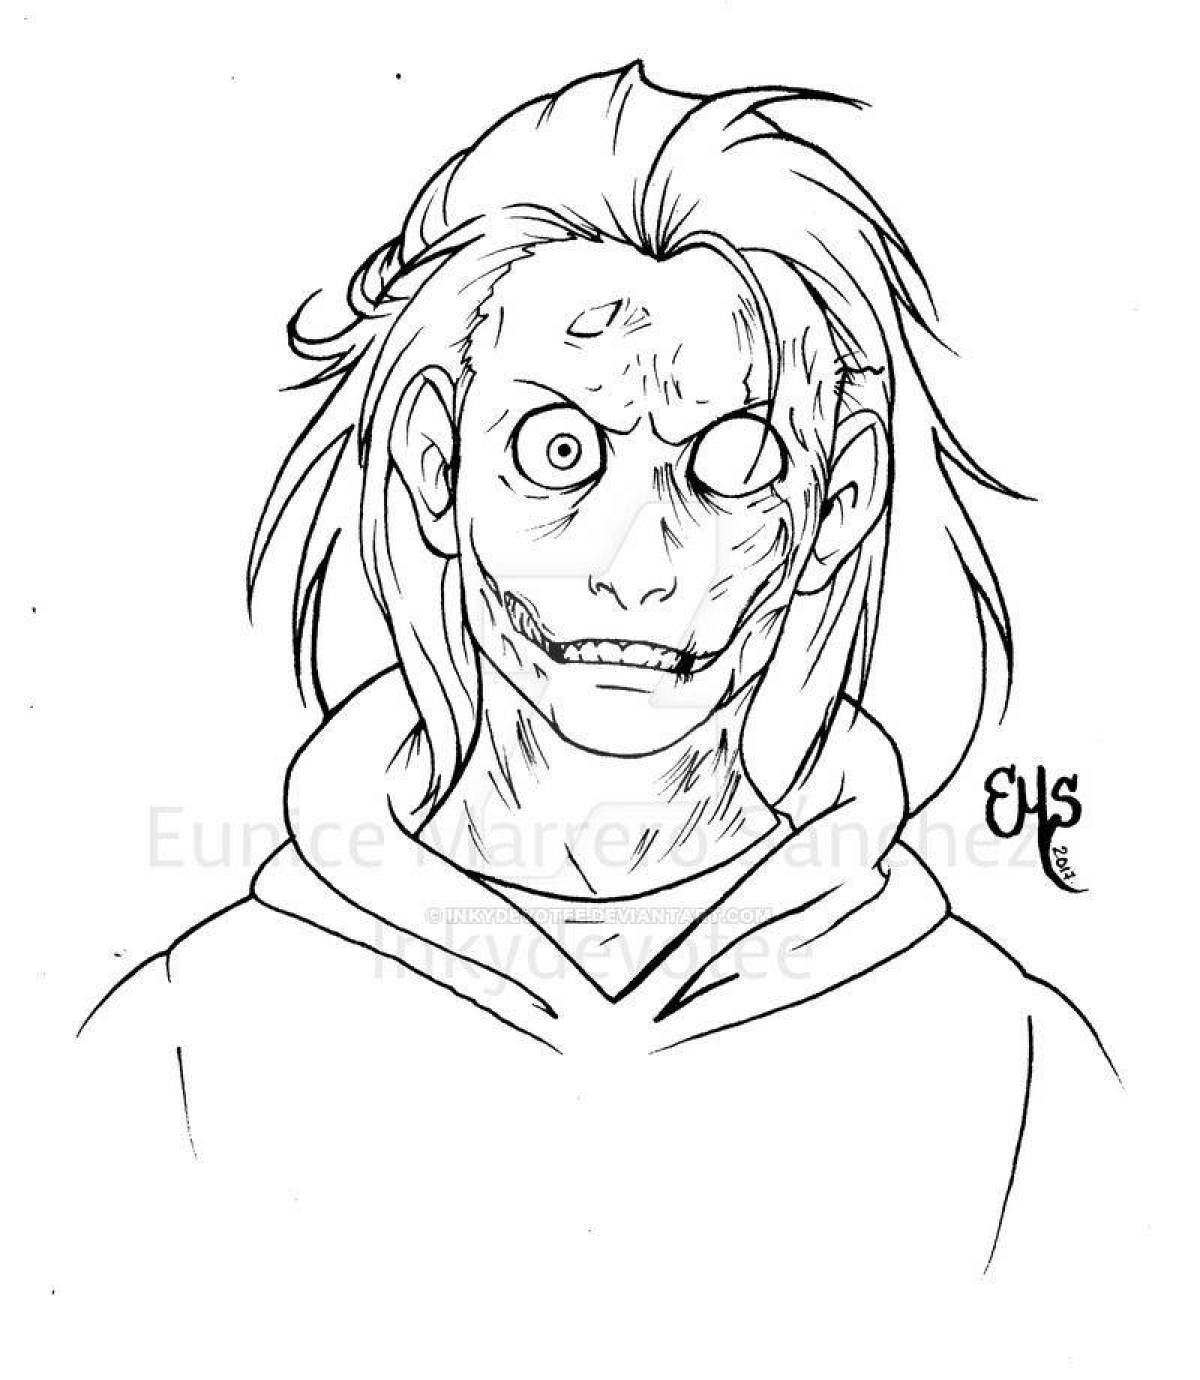 Geeky Jeff the Killer coloring book